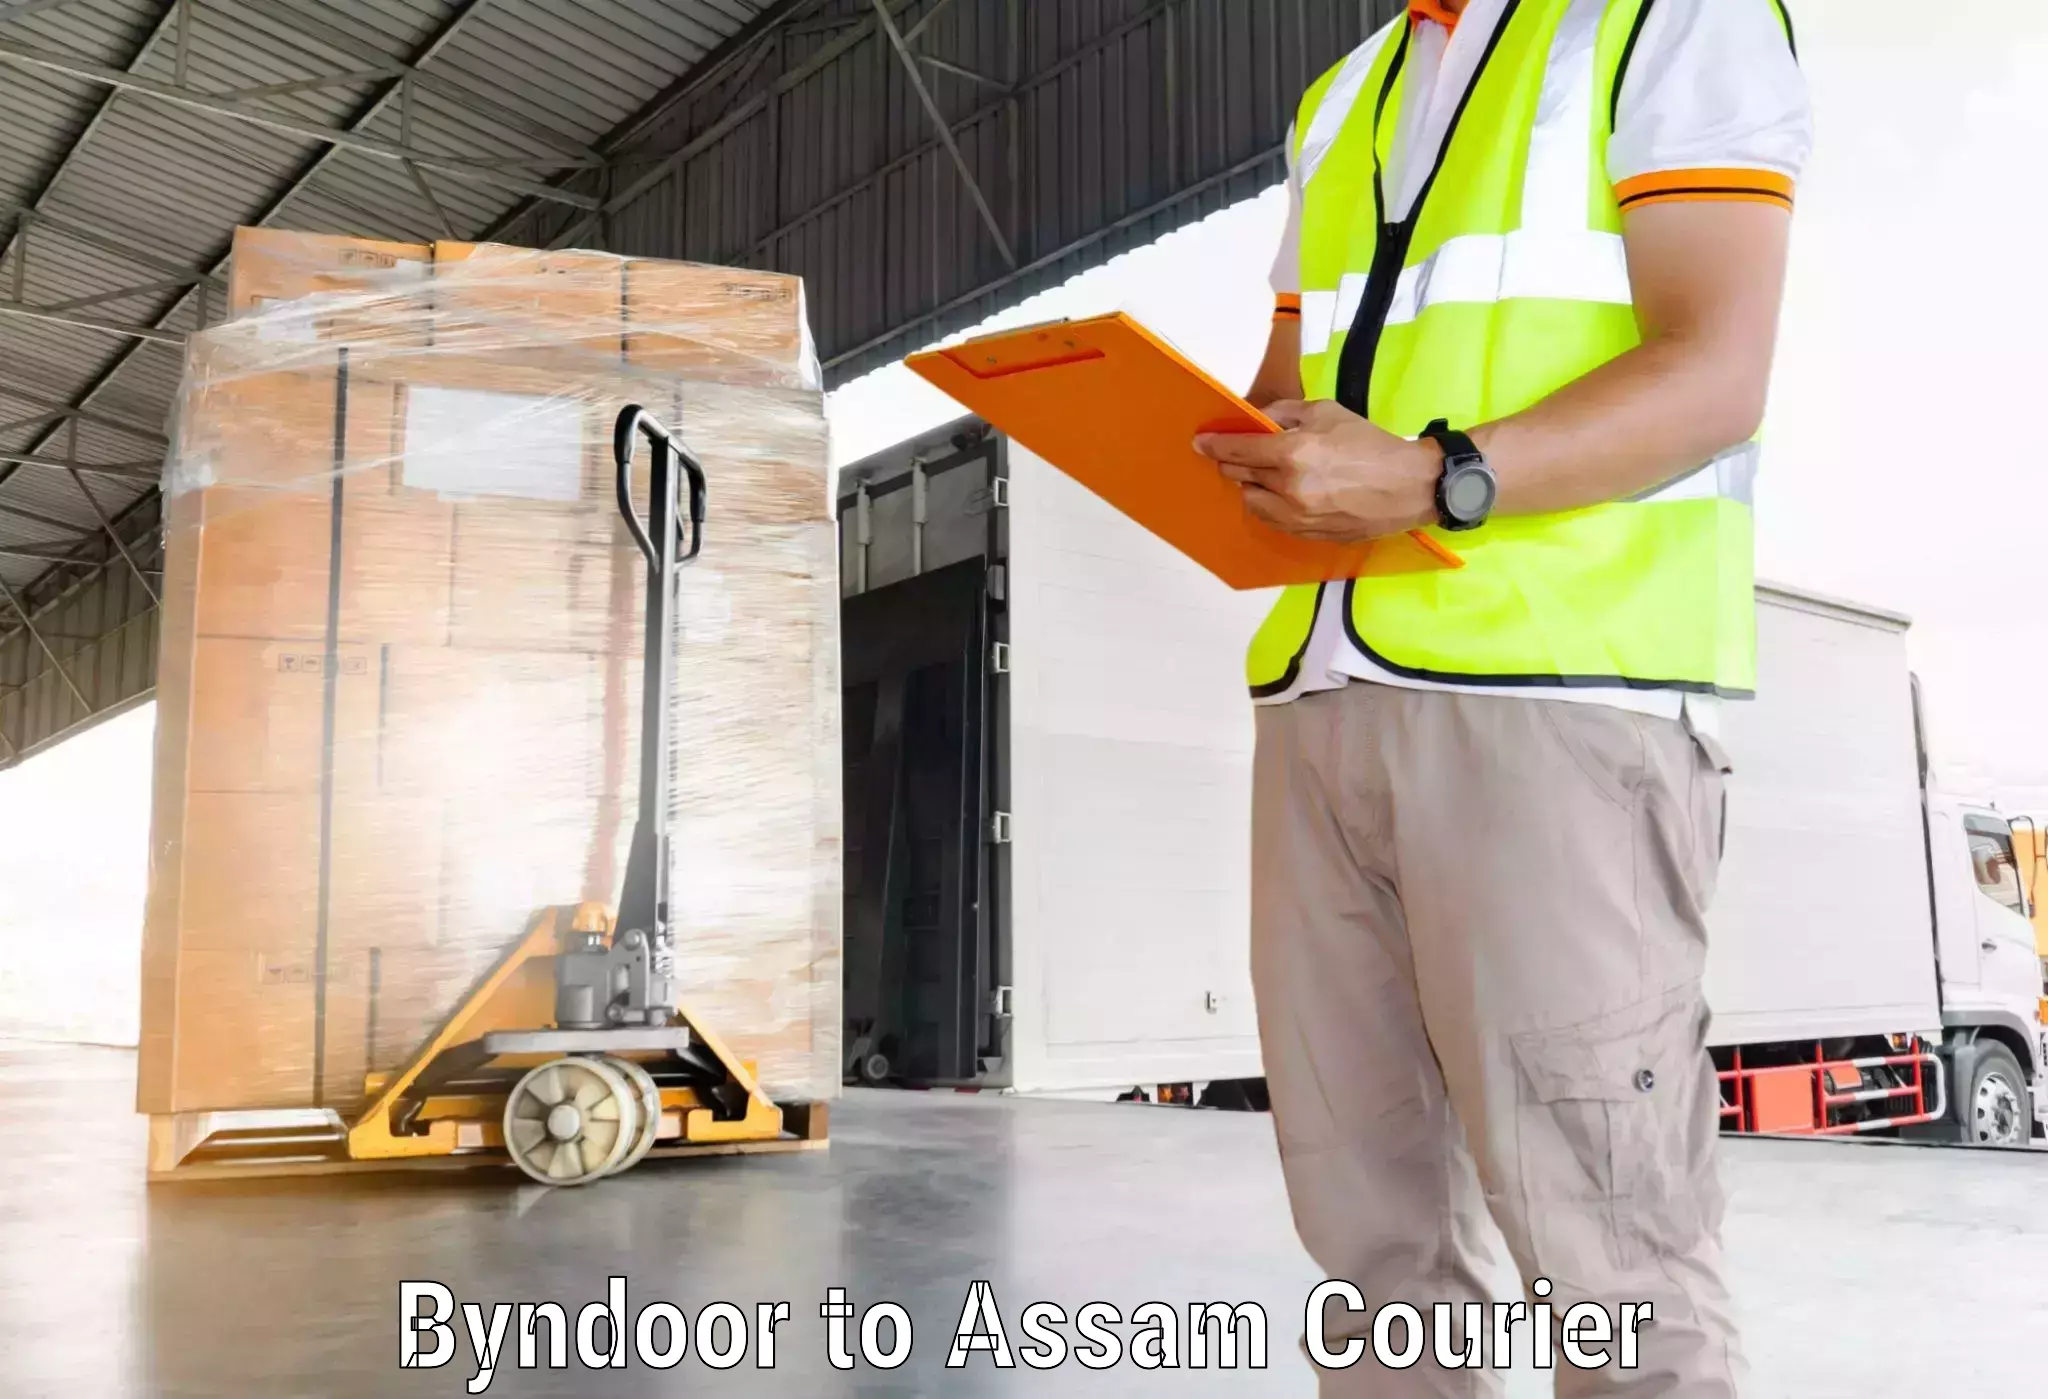 Global courier networks Byndoor to Kamrup